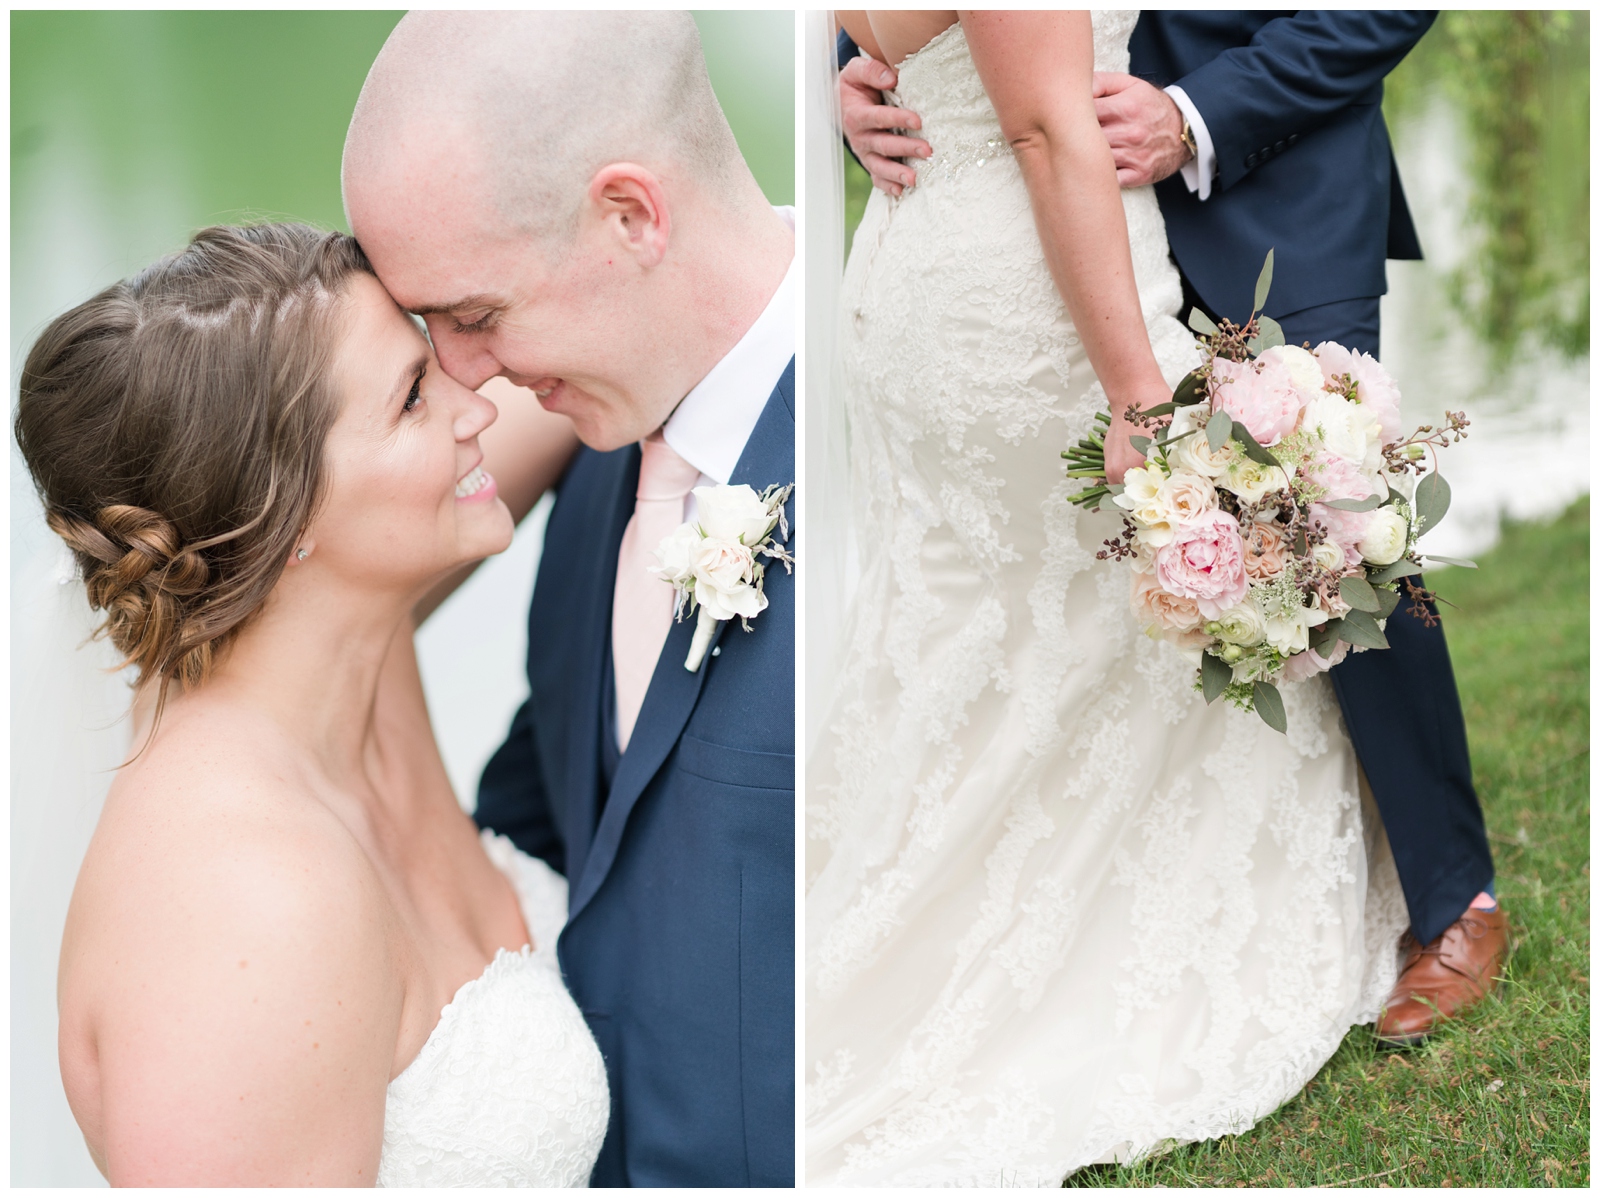 closeup portrait of bride and groom touching noses and photo of bride's bouquet with pink and white flowers